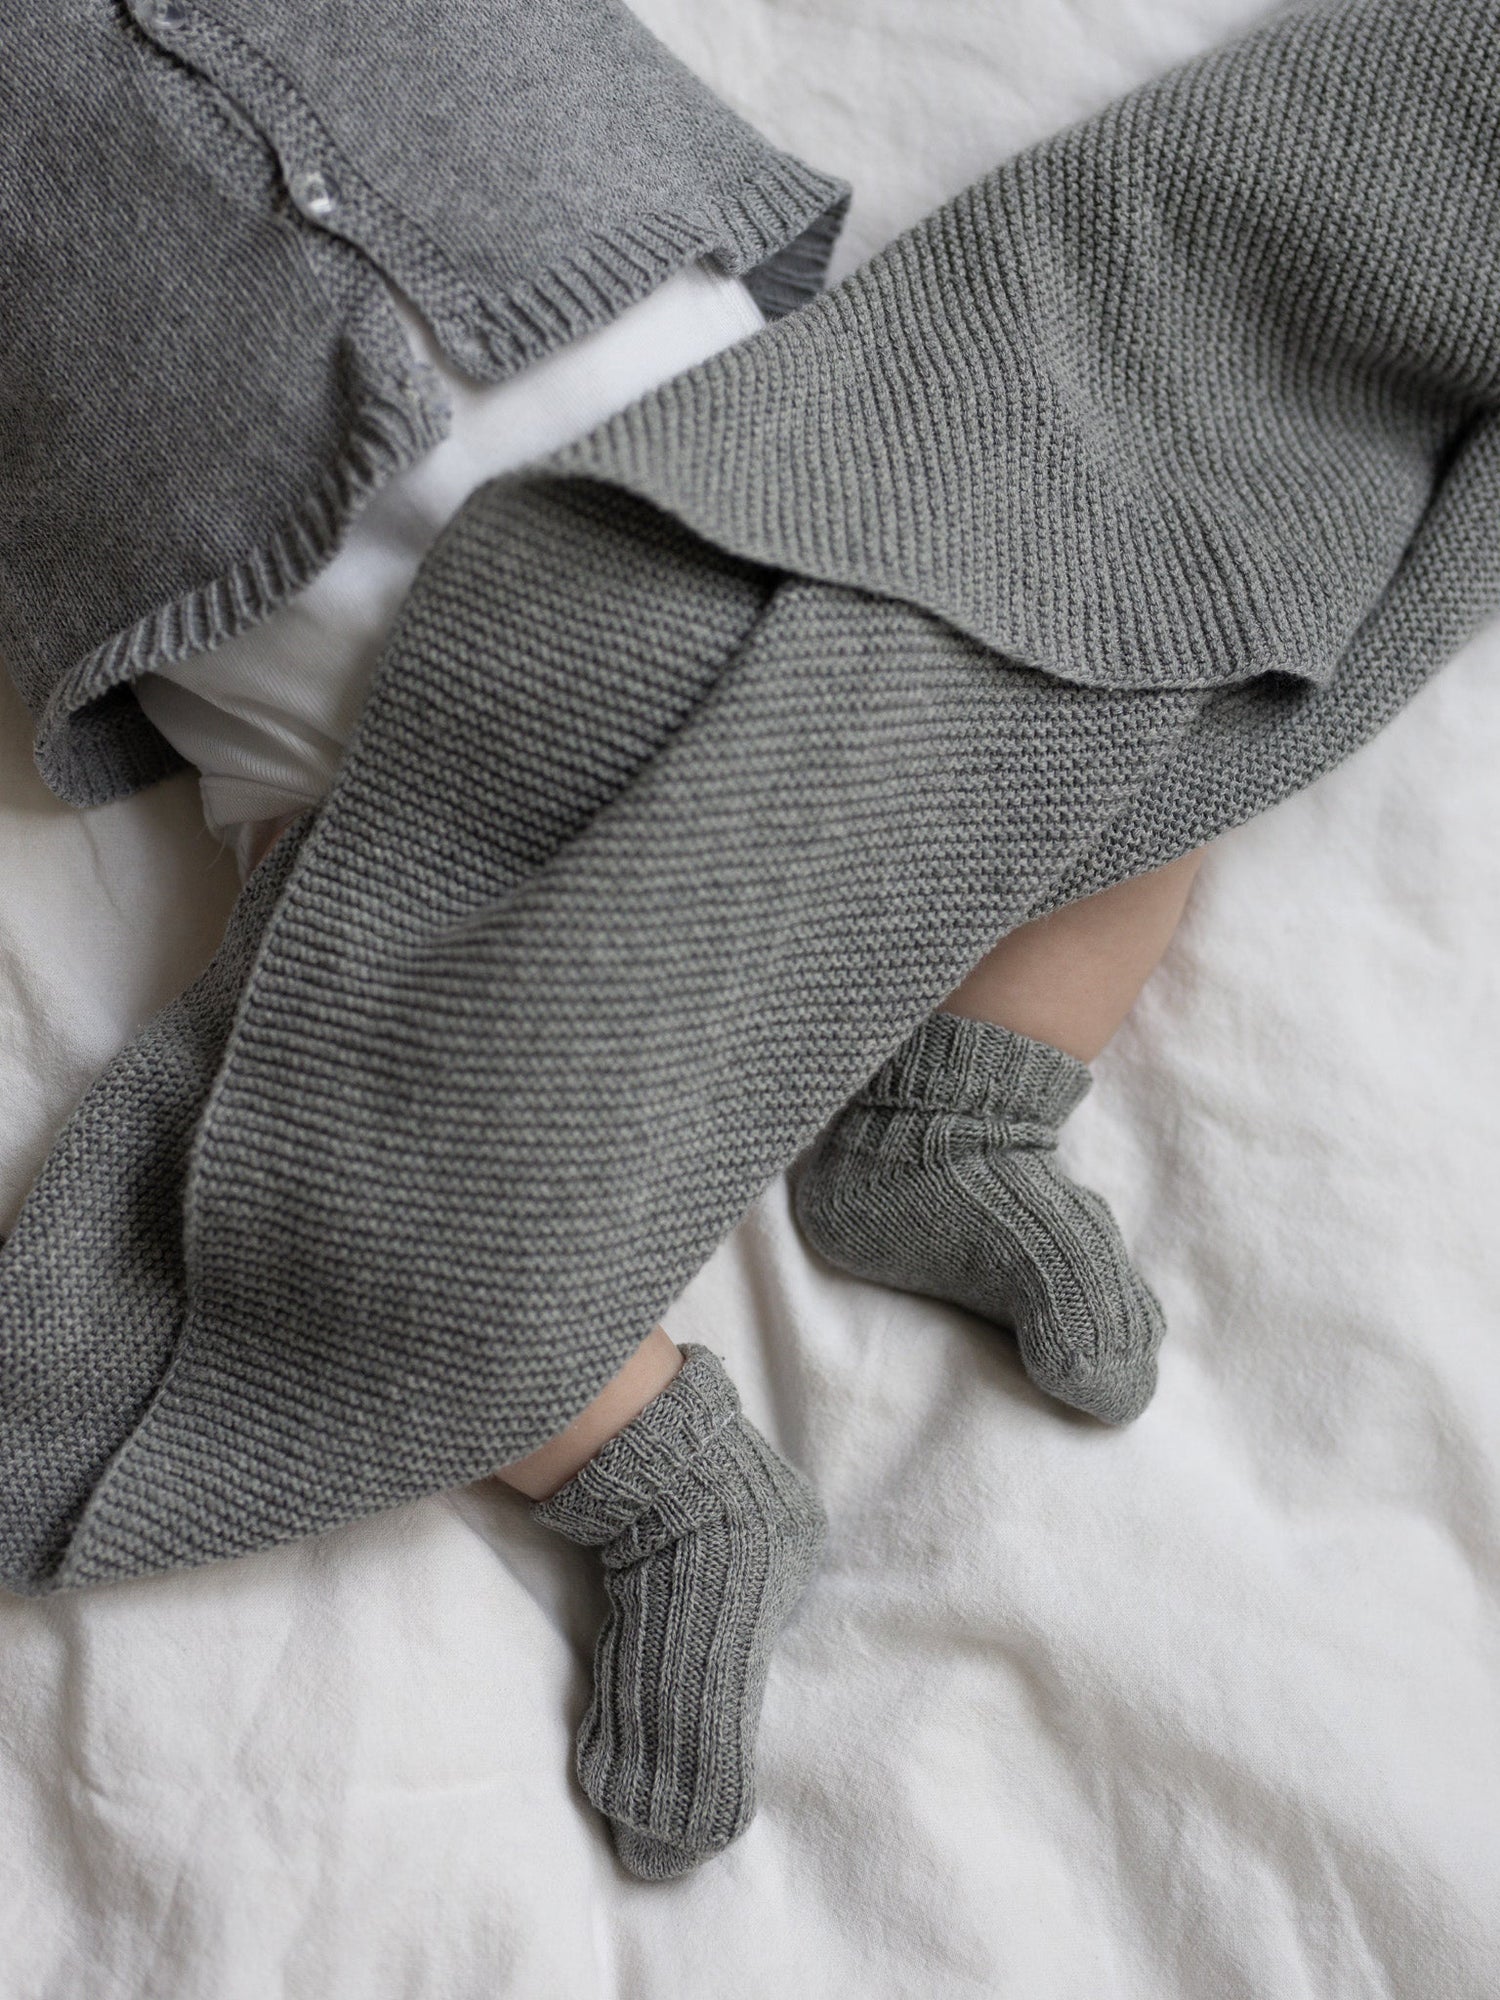 Sockenduo 'Grey/Milk' - The Little One • Family.Concept.Store. 